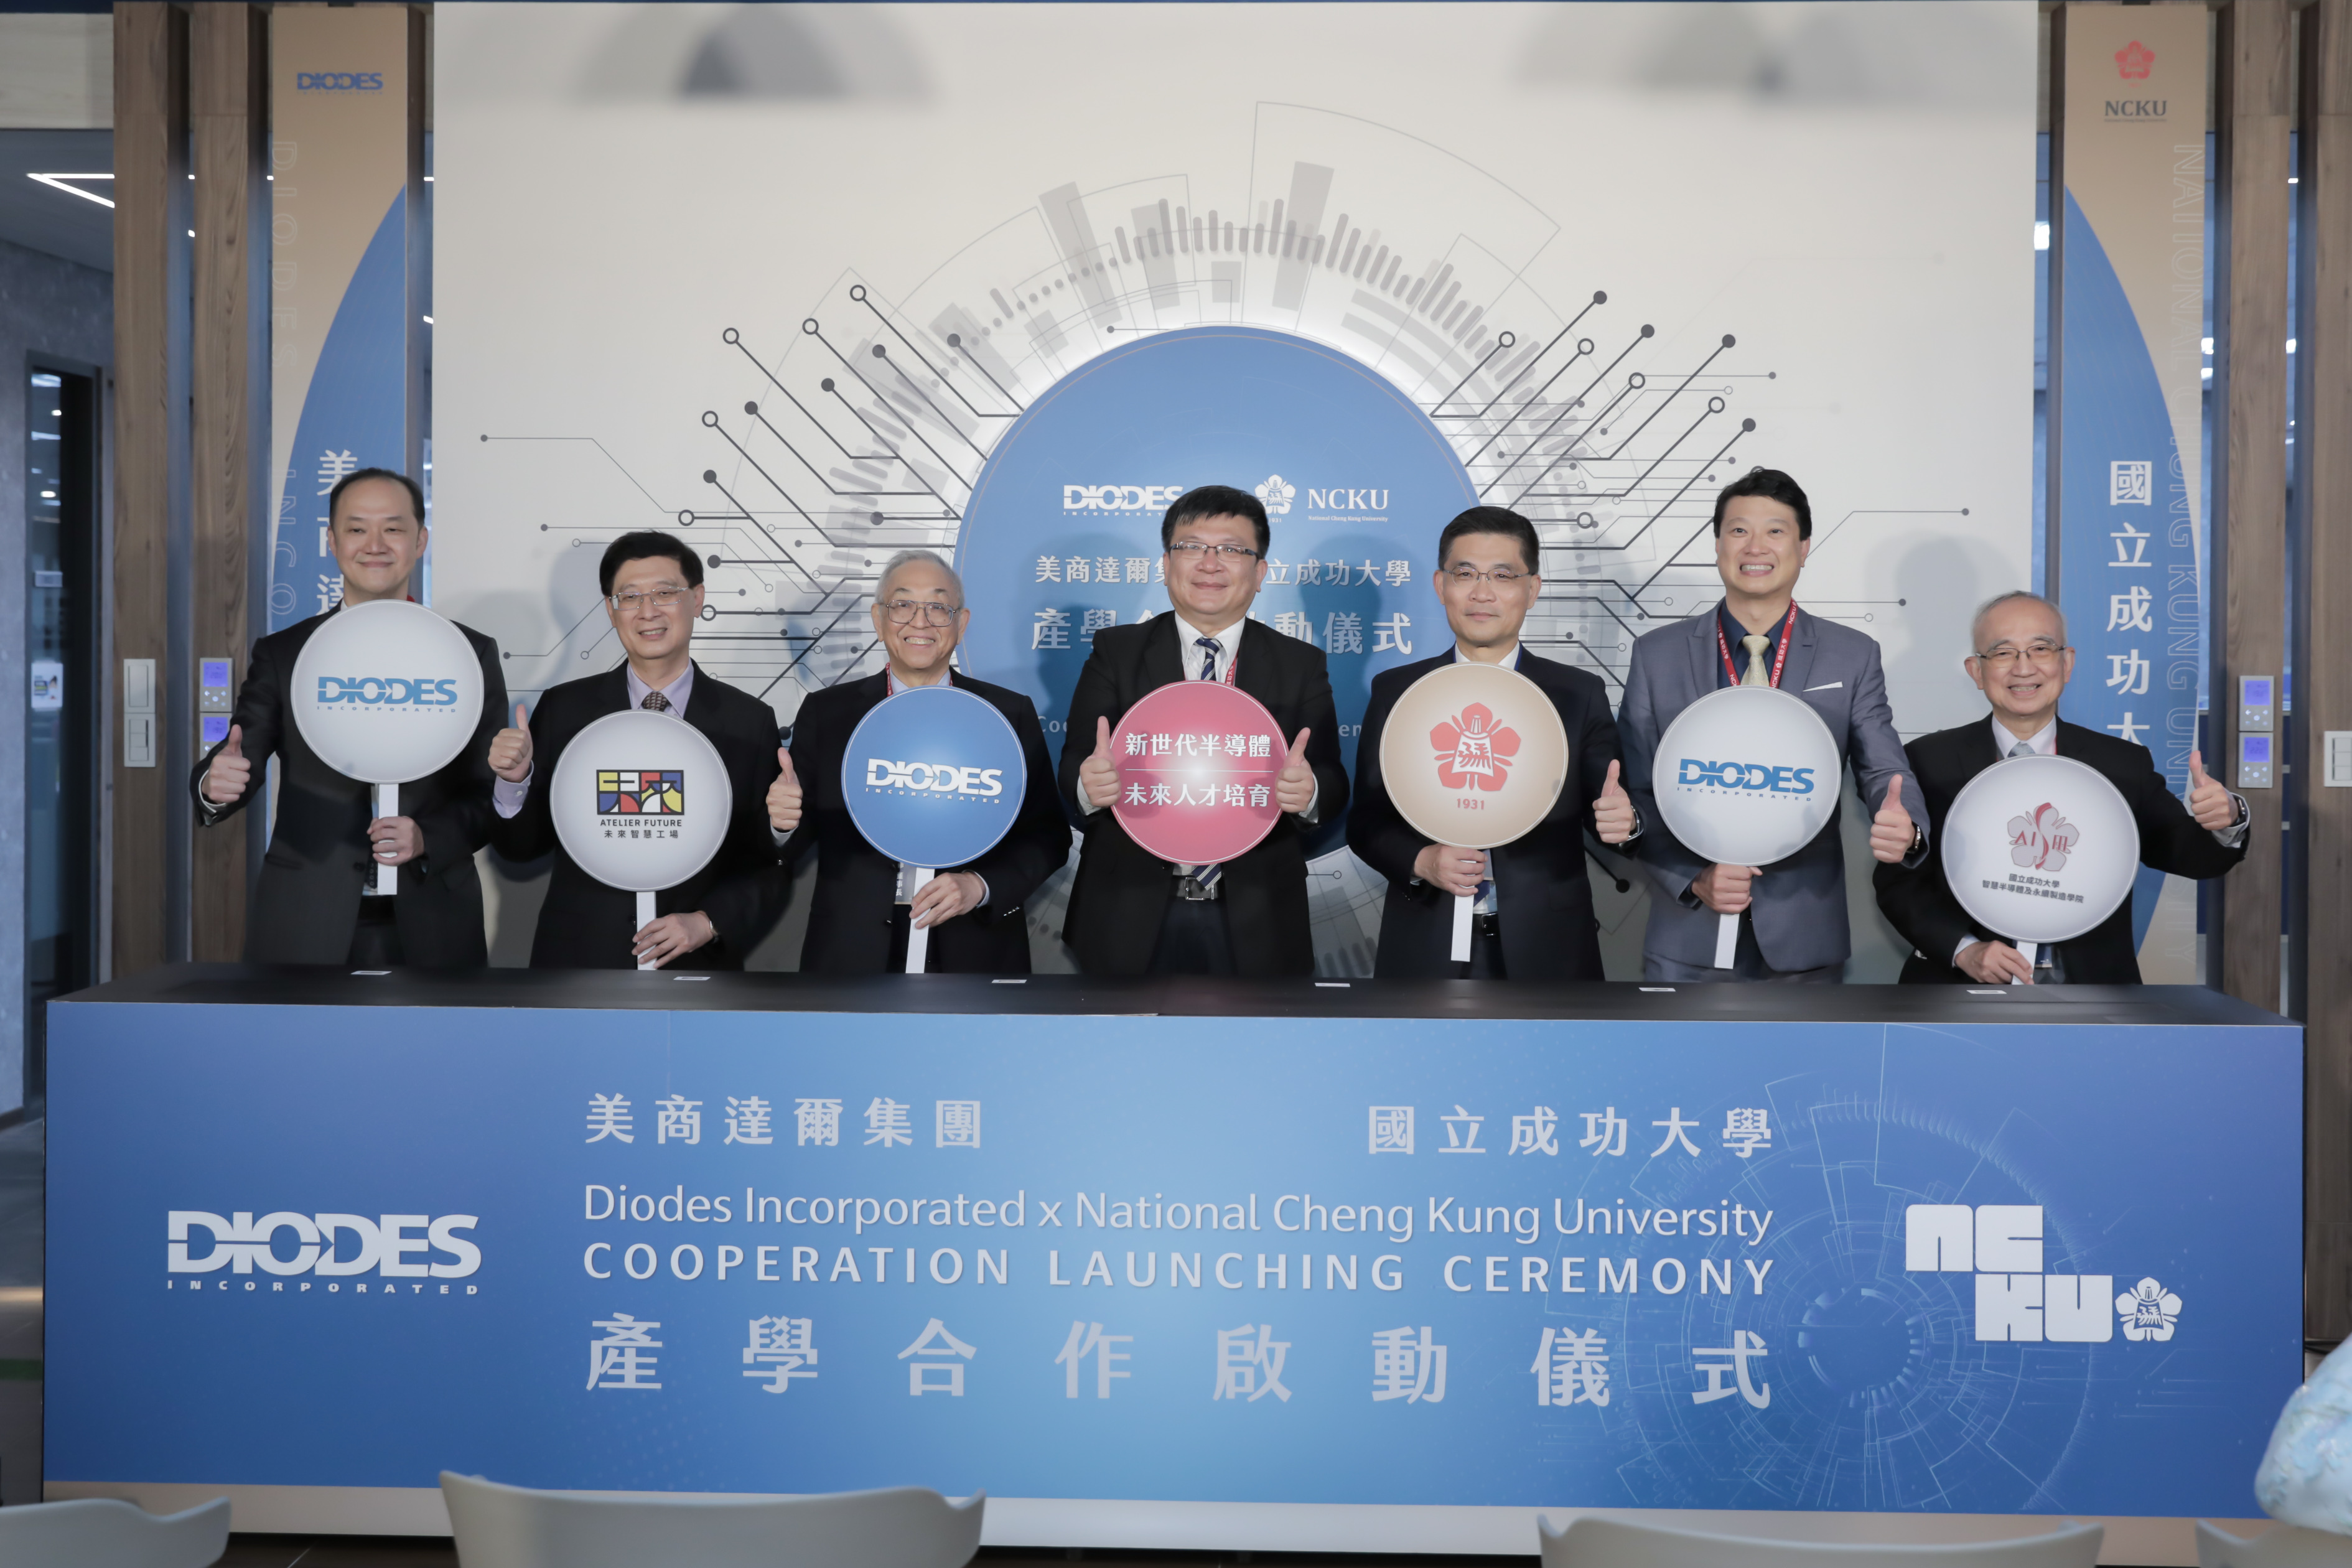 National Cheng Kung University and Diodes Incorporated held a widely attended industry-academia cooperation launching ceremony on February 8th